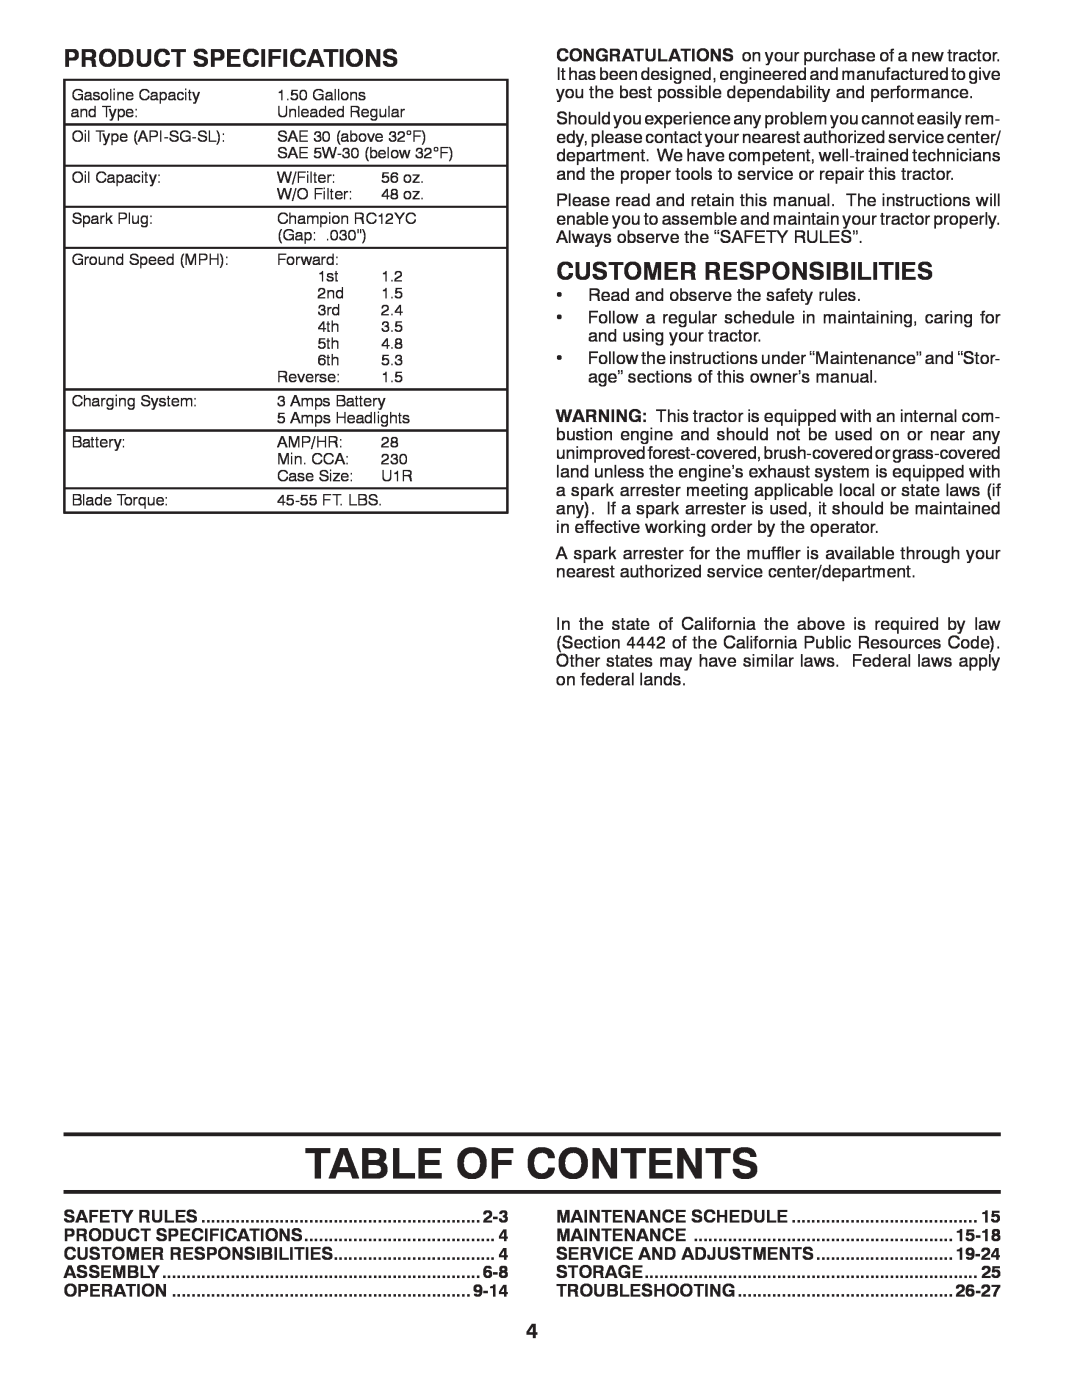 Poulan 96042003505 manual Table Of Contents, Product Specifications, Customer Responsibilities 